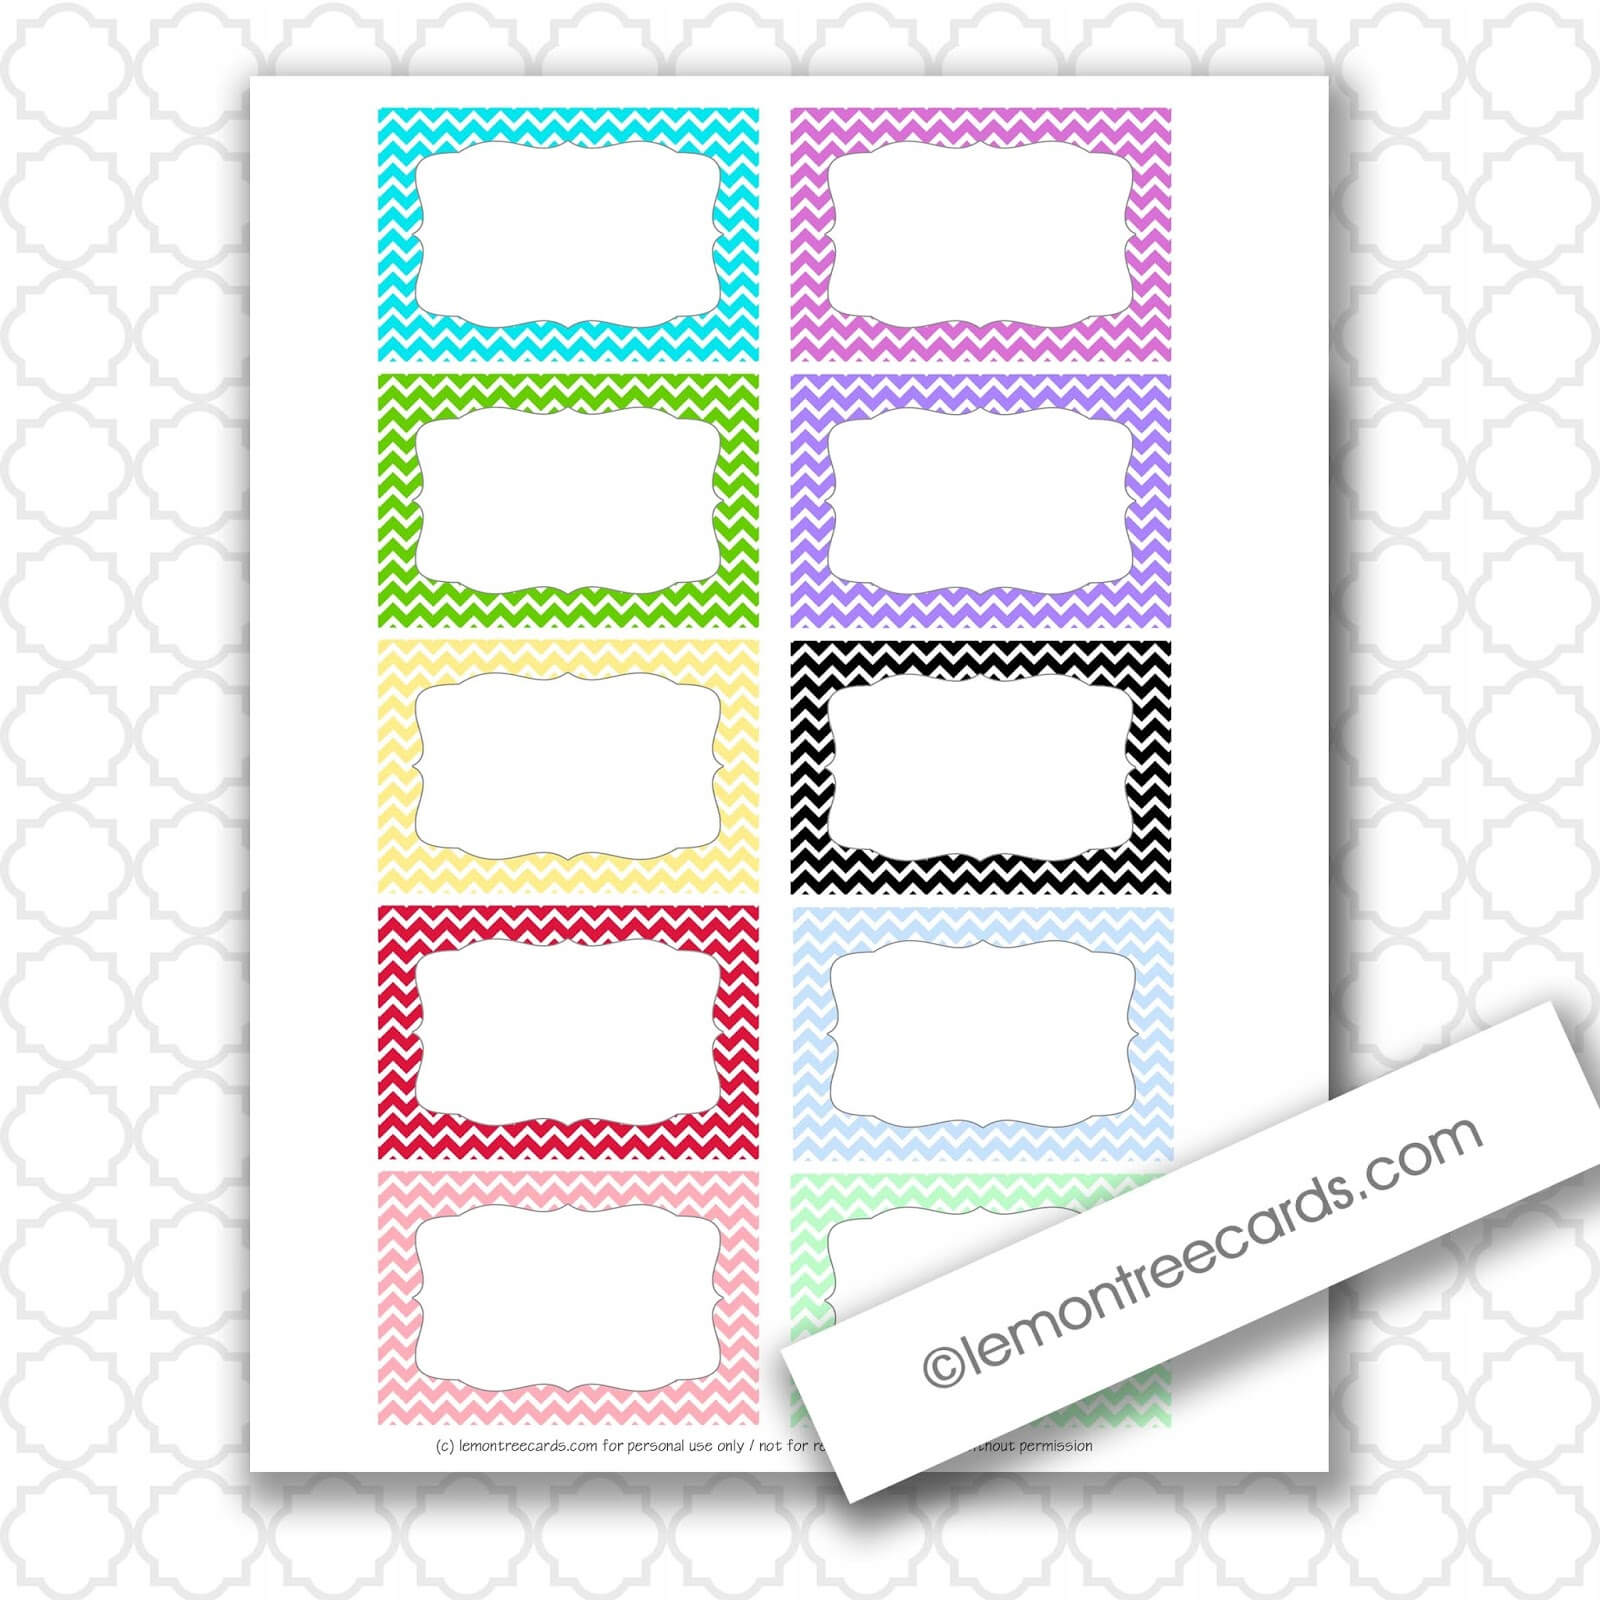 28+ [ 5X7 Index Card Template ] | 5X7 Index Card Template For 3X5 Blank Index Card Template